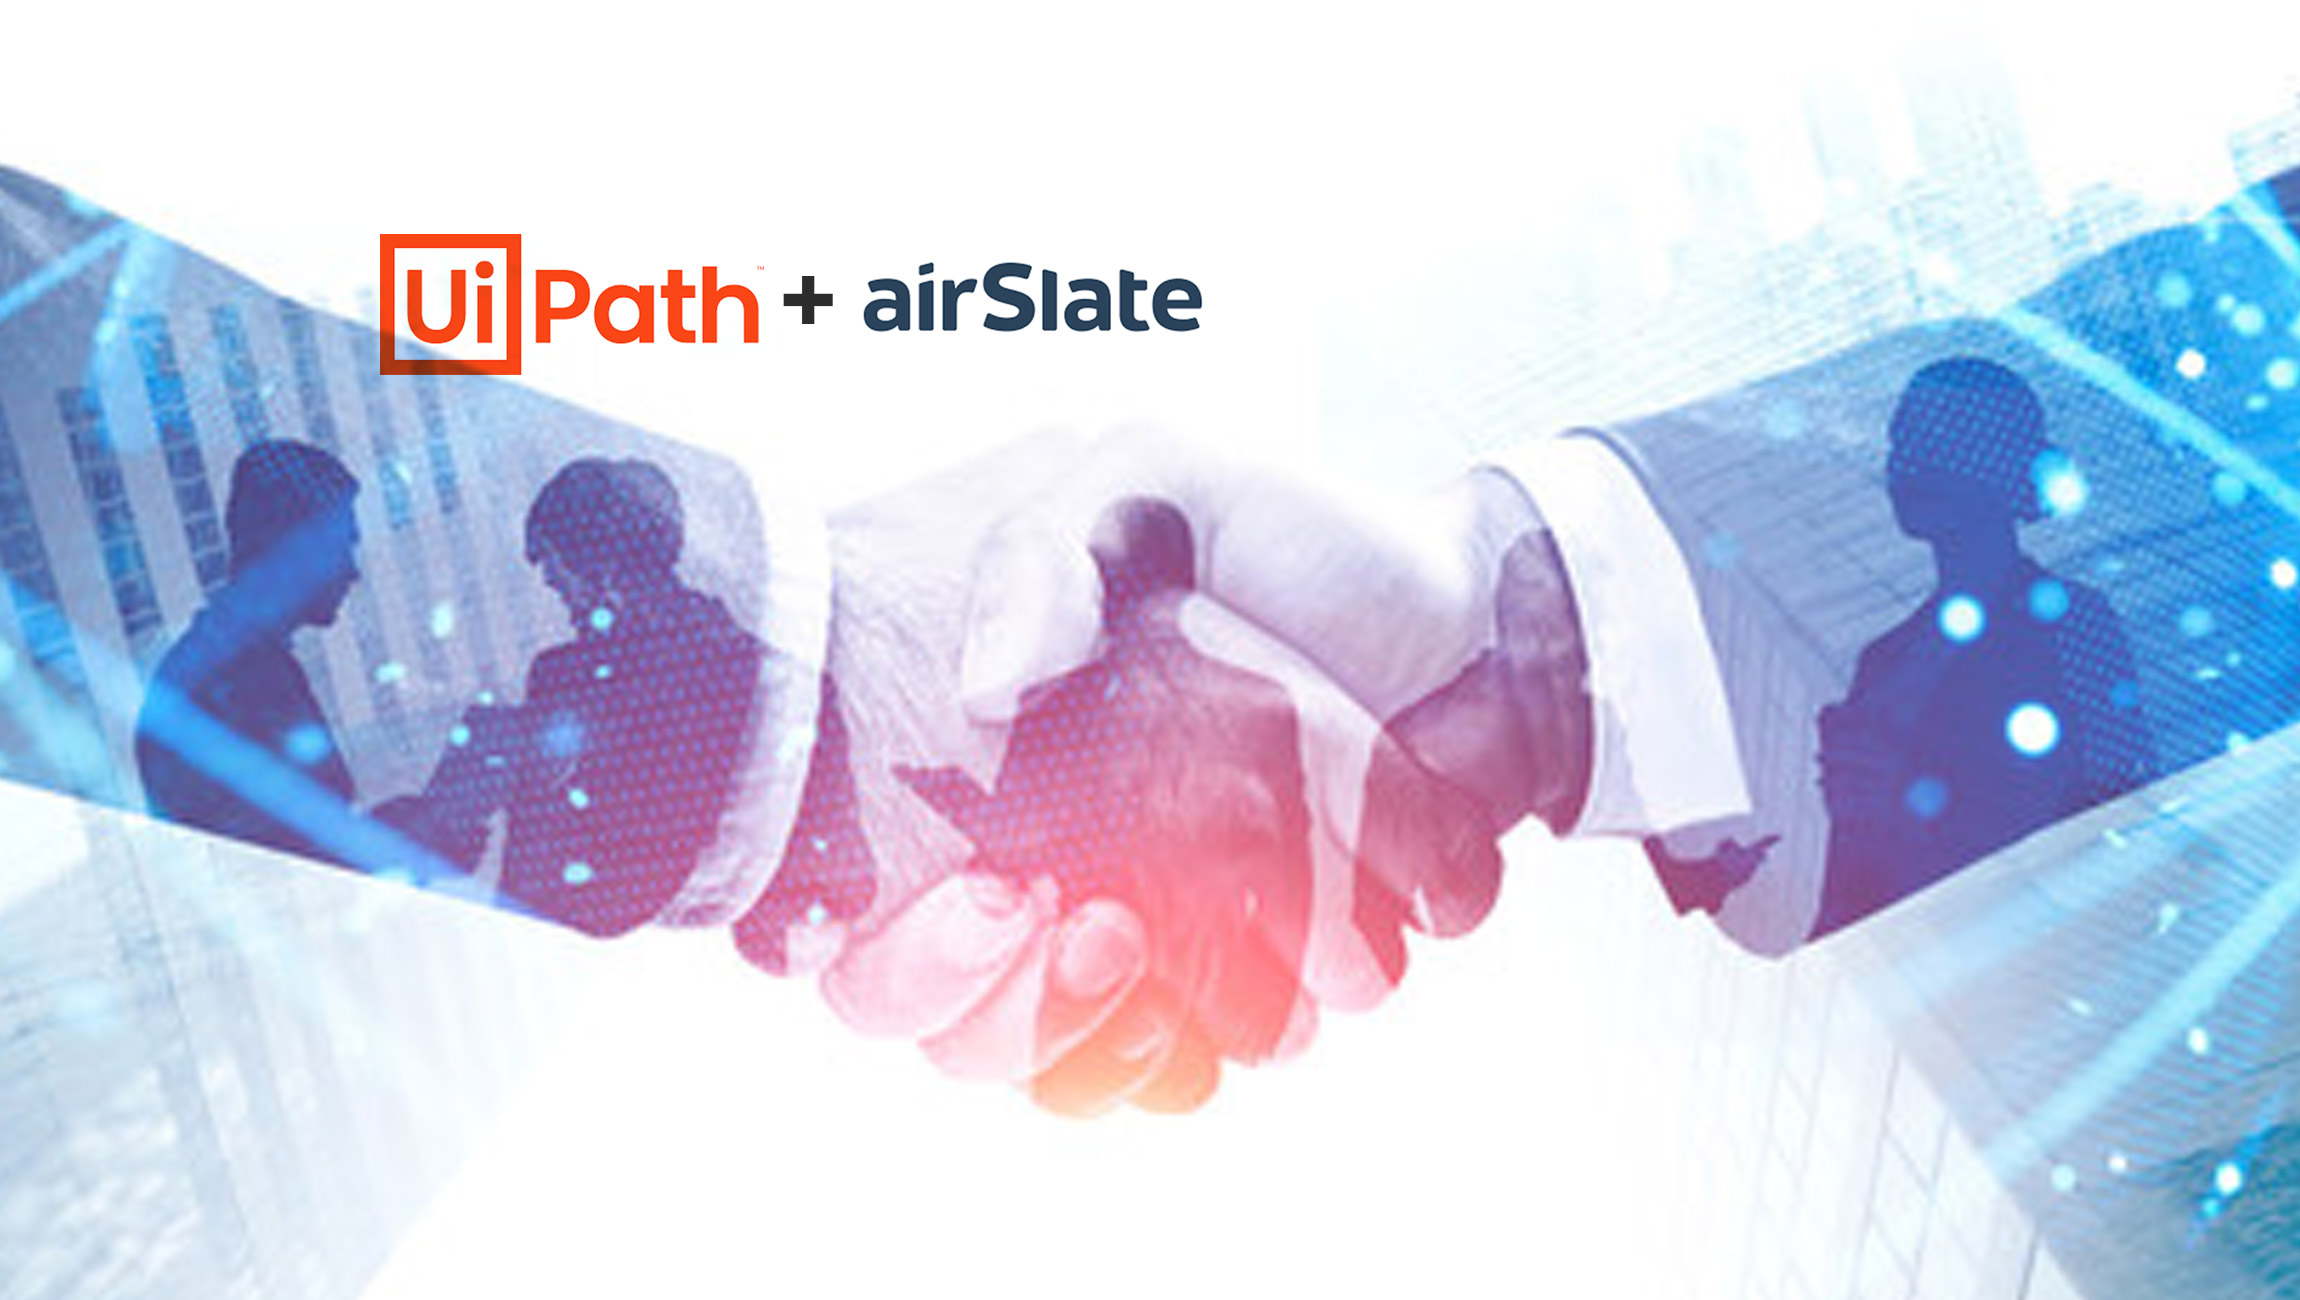 UiPath and airSlate Partner to Propel Small Businesses to Grow Faster as Fully Automated Businesses